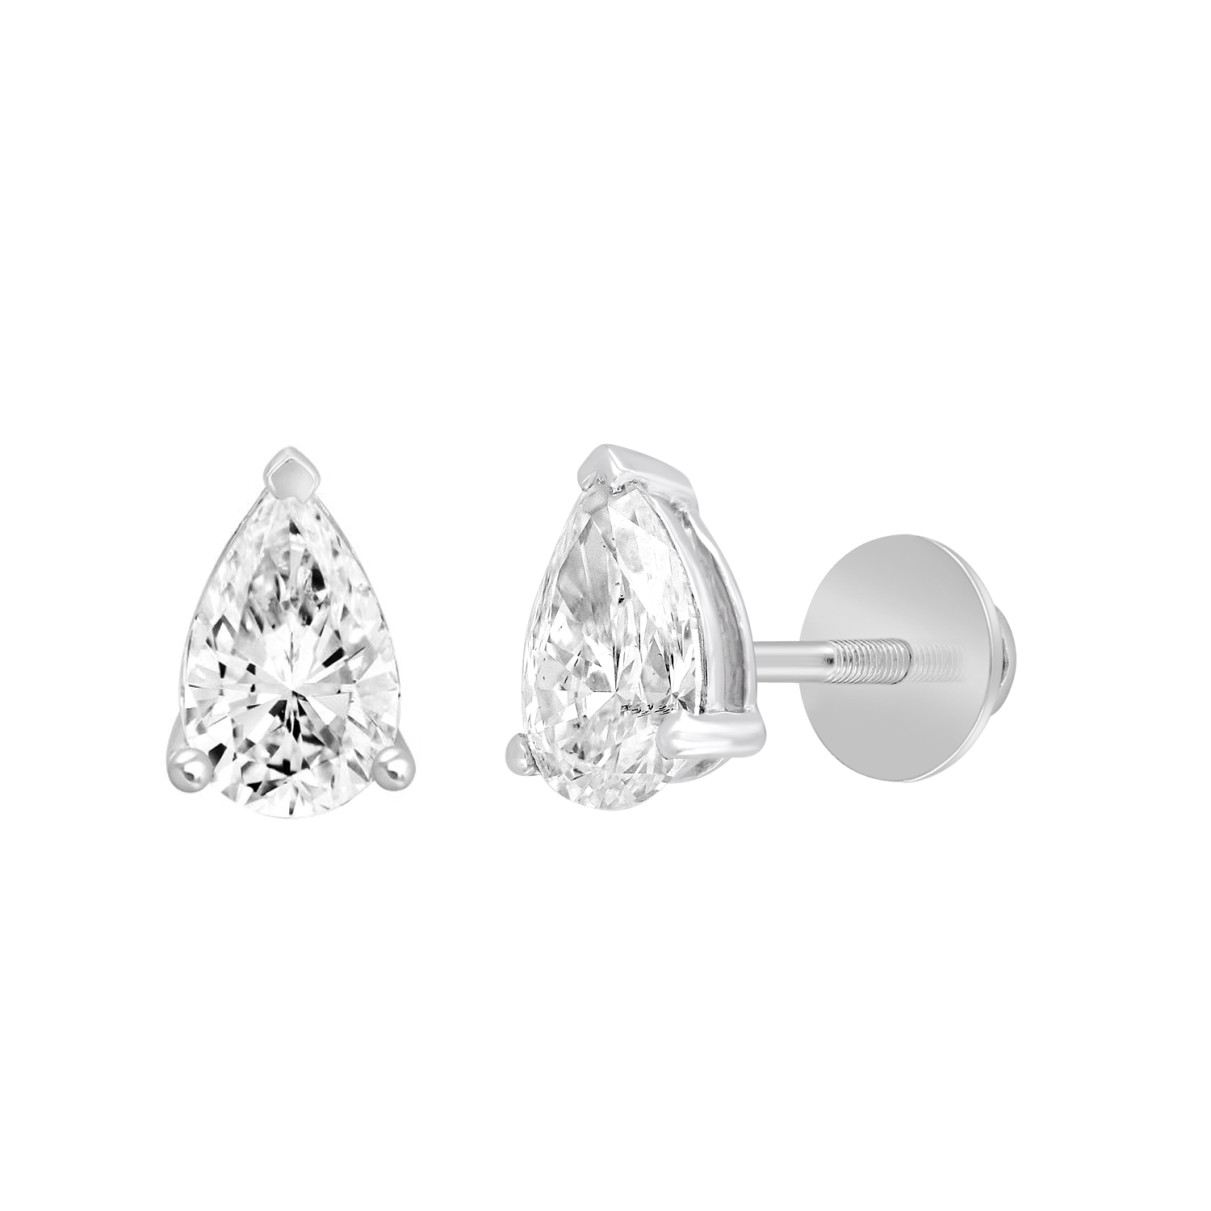 LADIES SOLITAIRE EARRINGS 1/2CT PEAR DIAMOND 14K WHITE GOLD